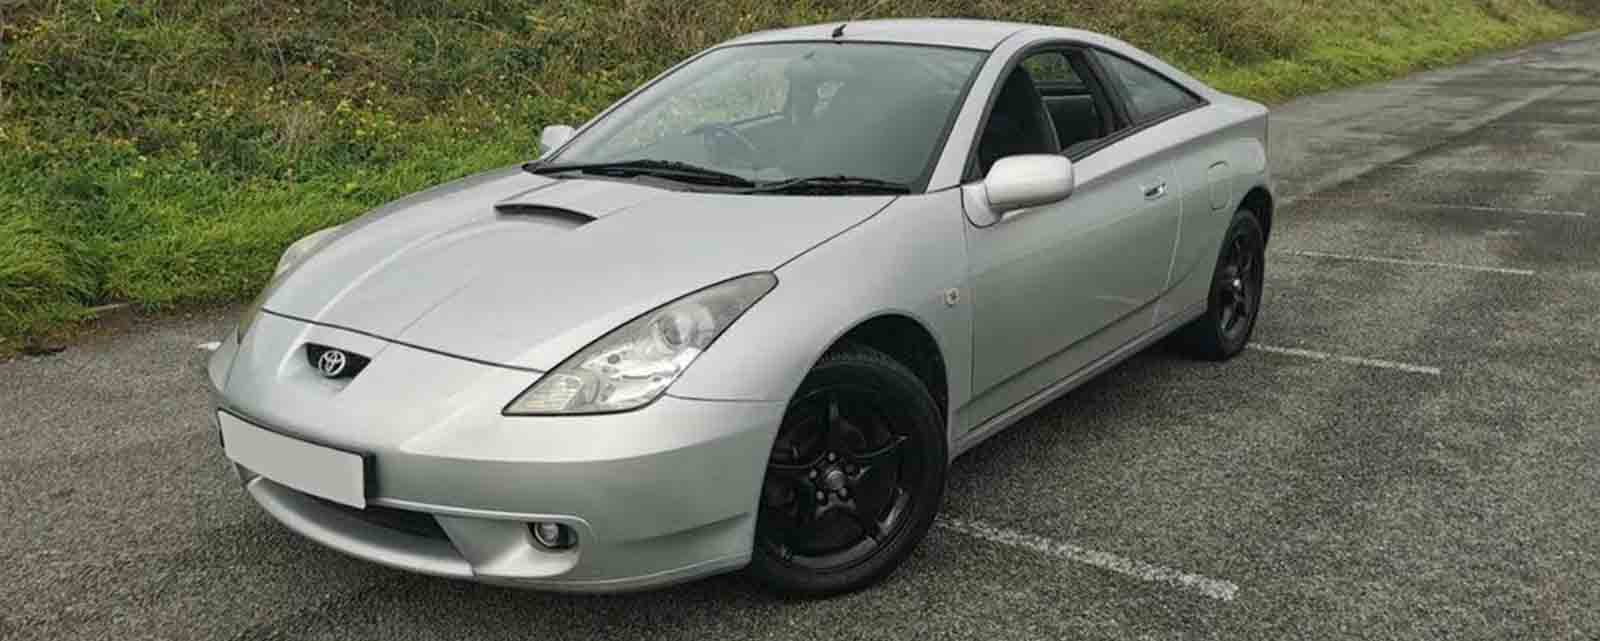 Toyota Celica Parts and Accessories